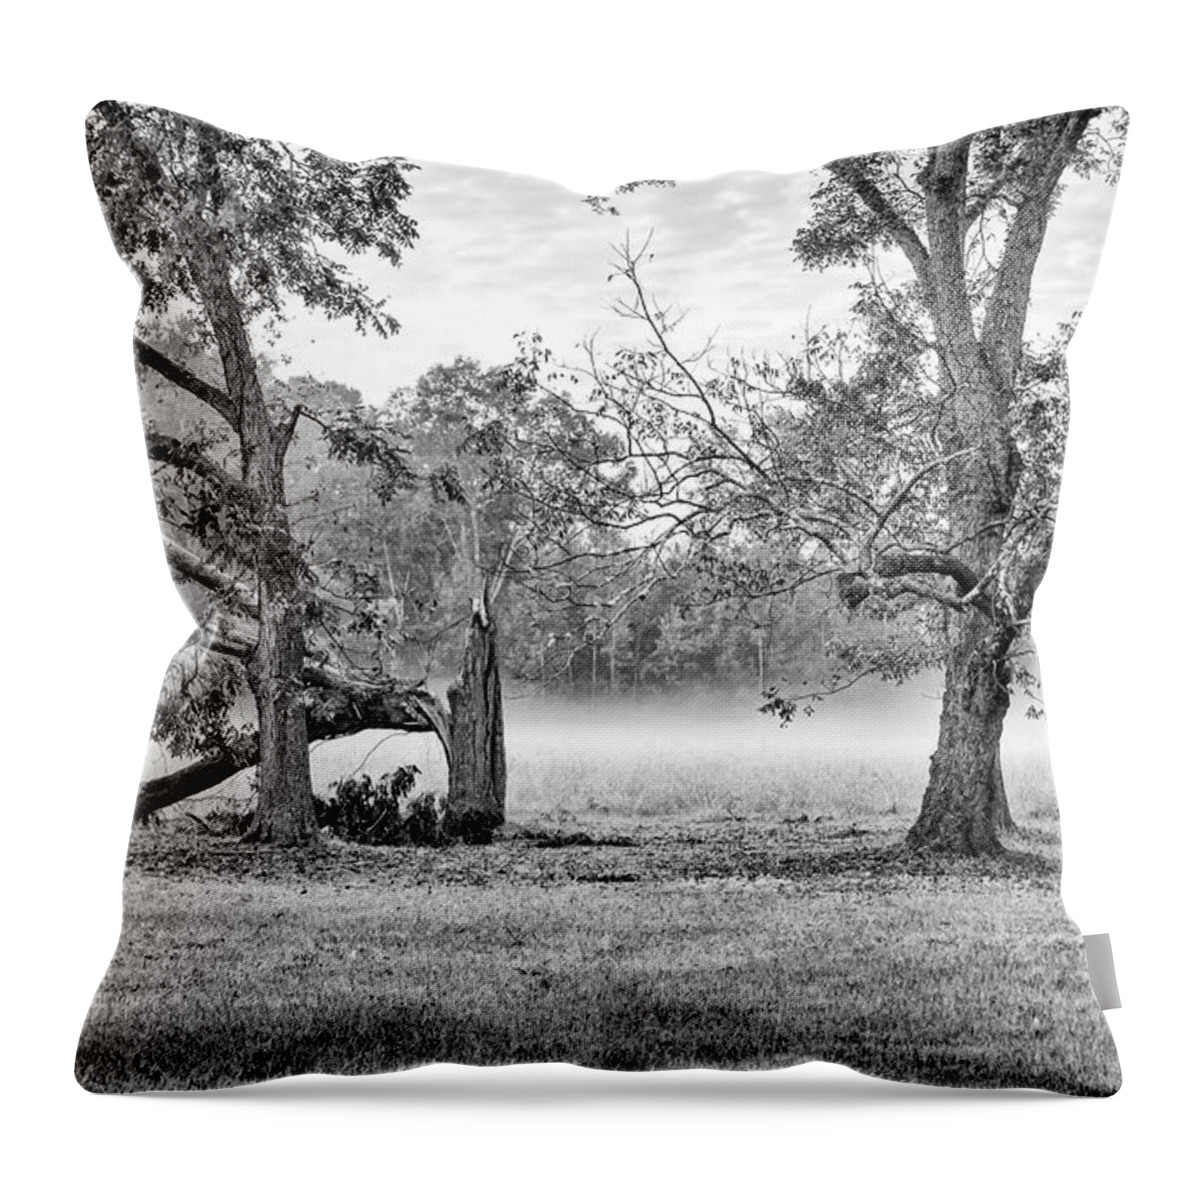 Fog Throw Pillow featuring the photograph Dale - Foggy Morning by Scott Hansen